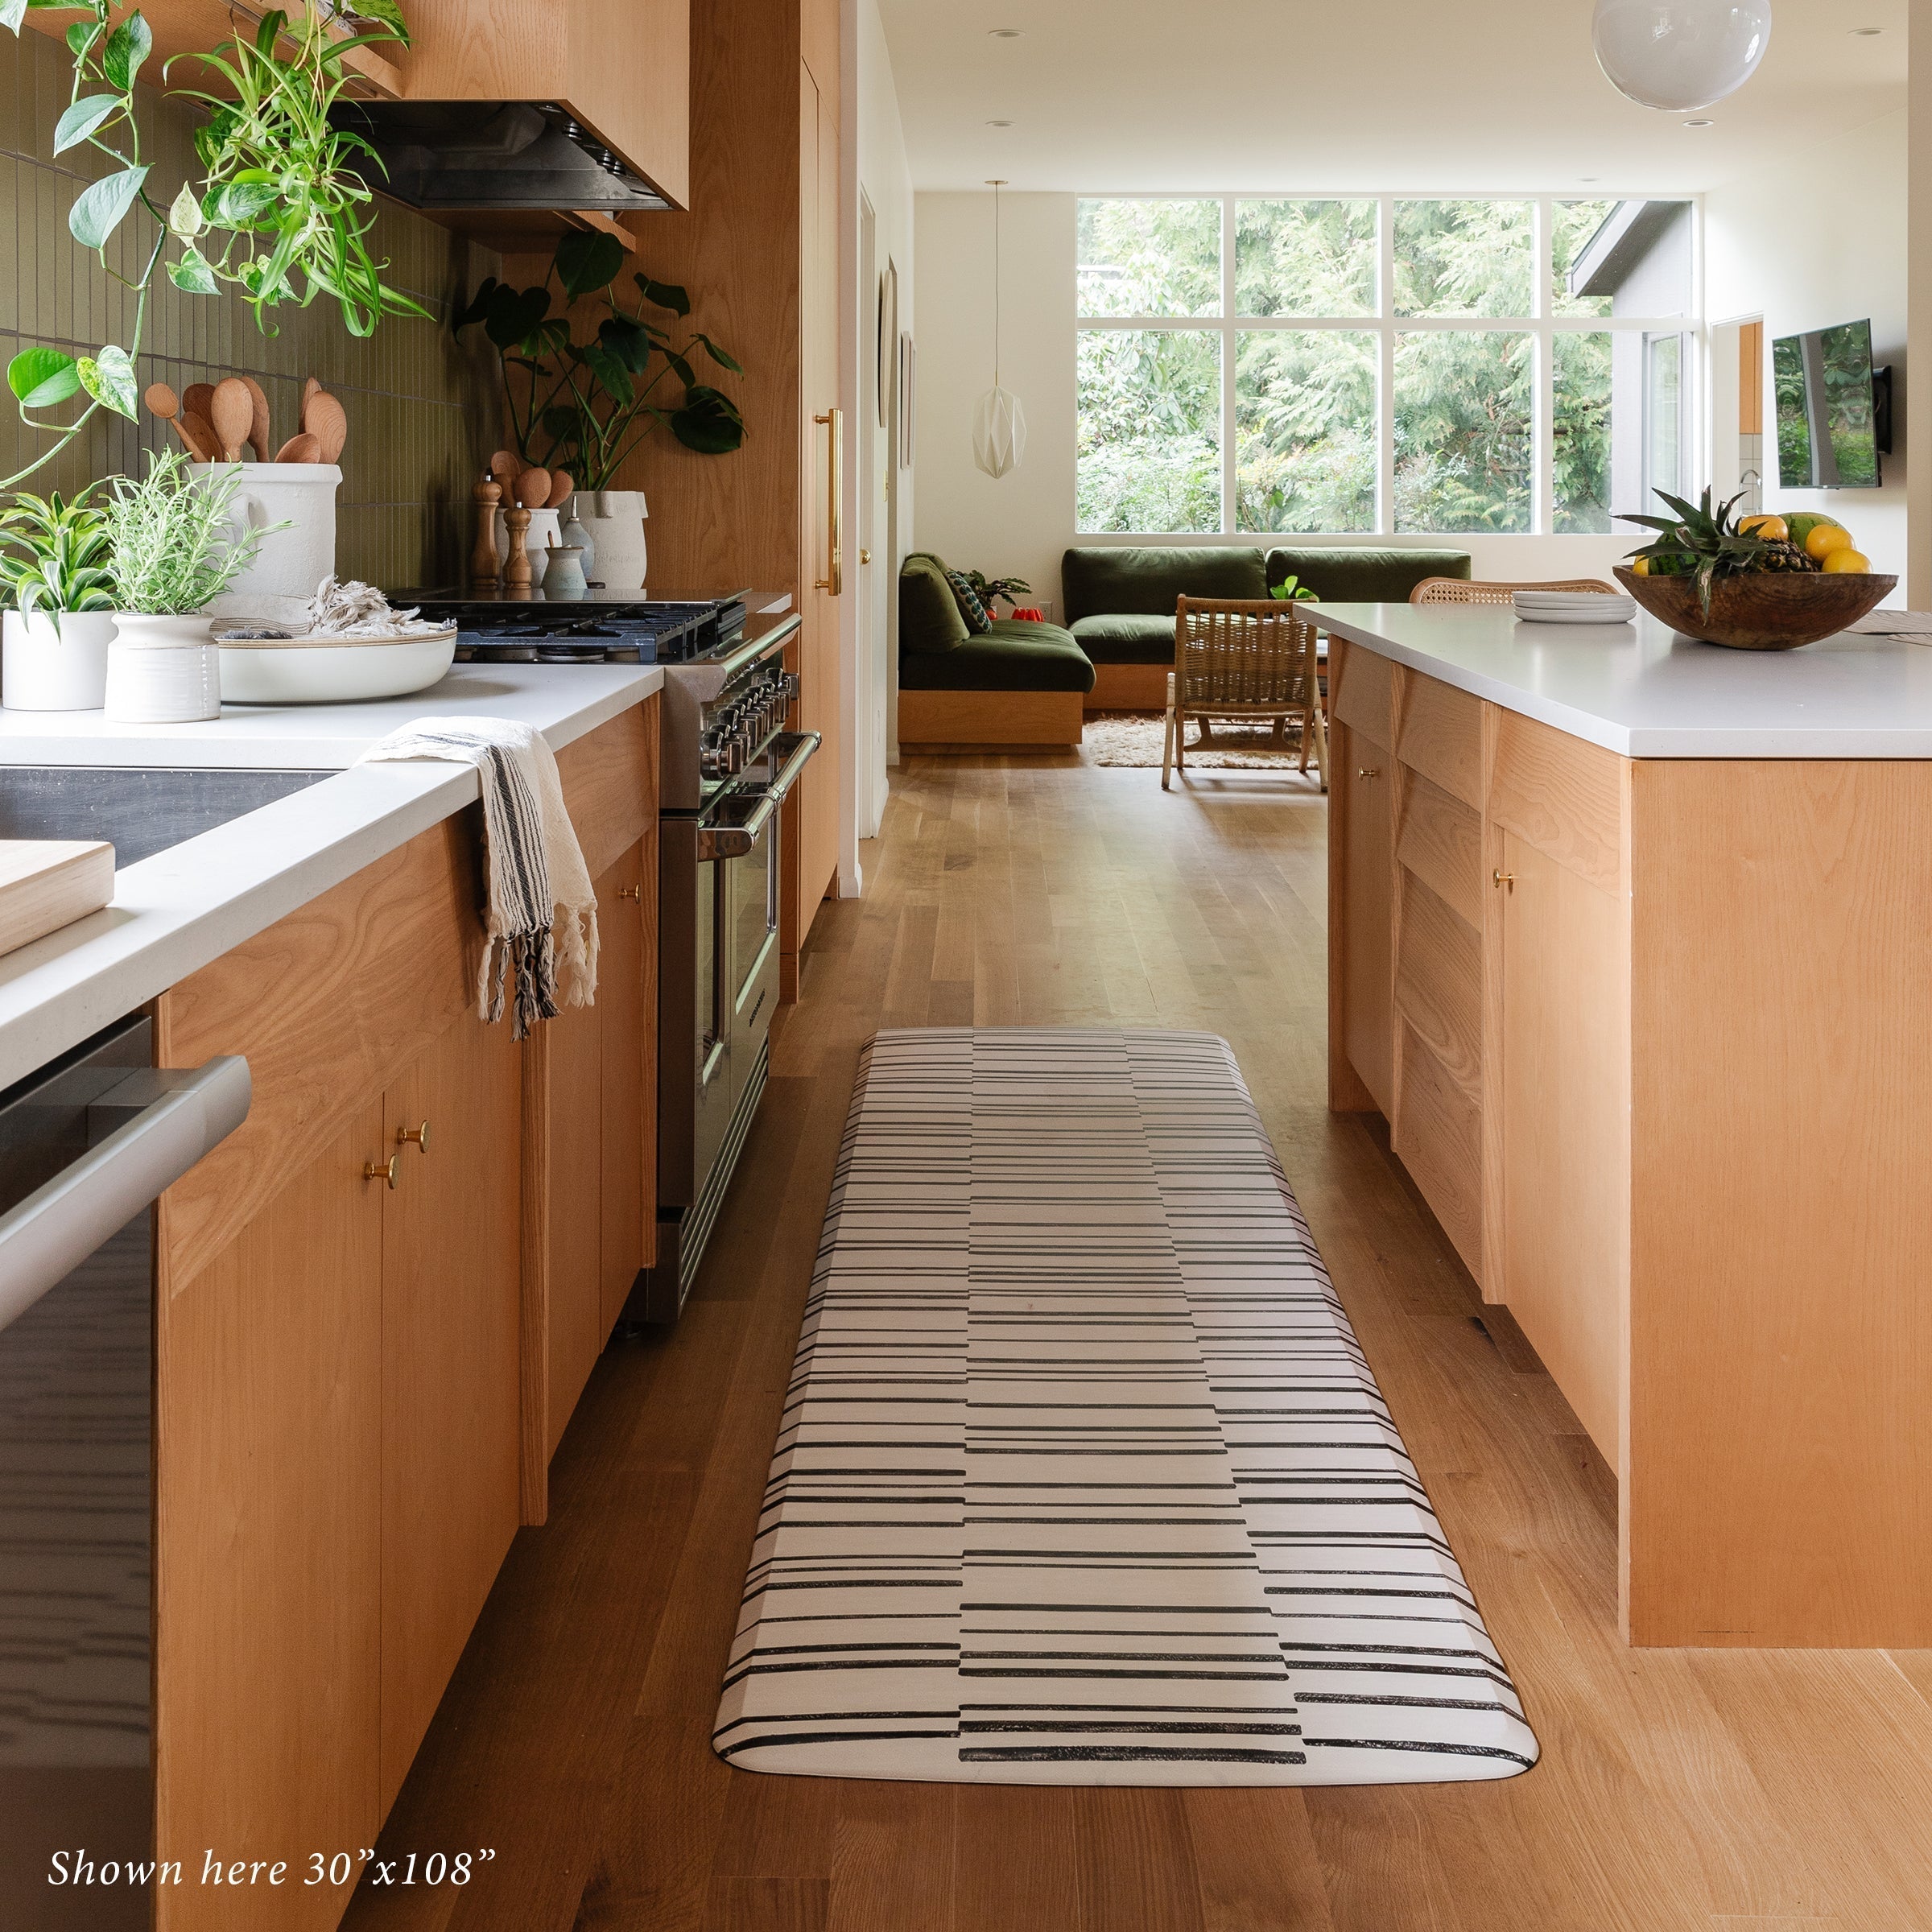 Black and White Minimal Inverted Stripe Print Standing Mat in kitchen in size 30x108